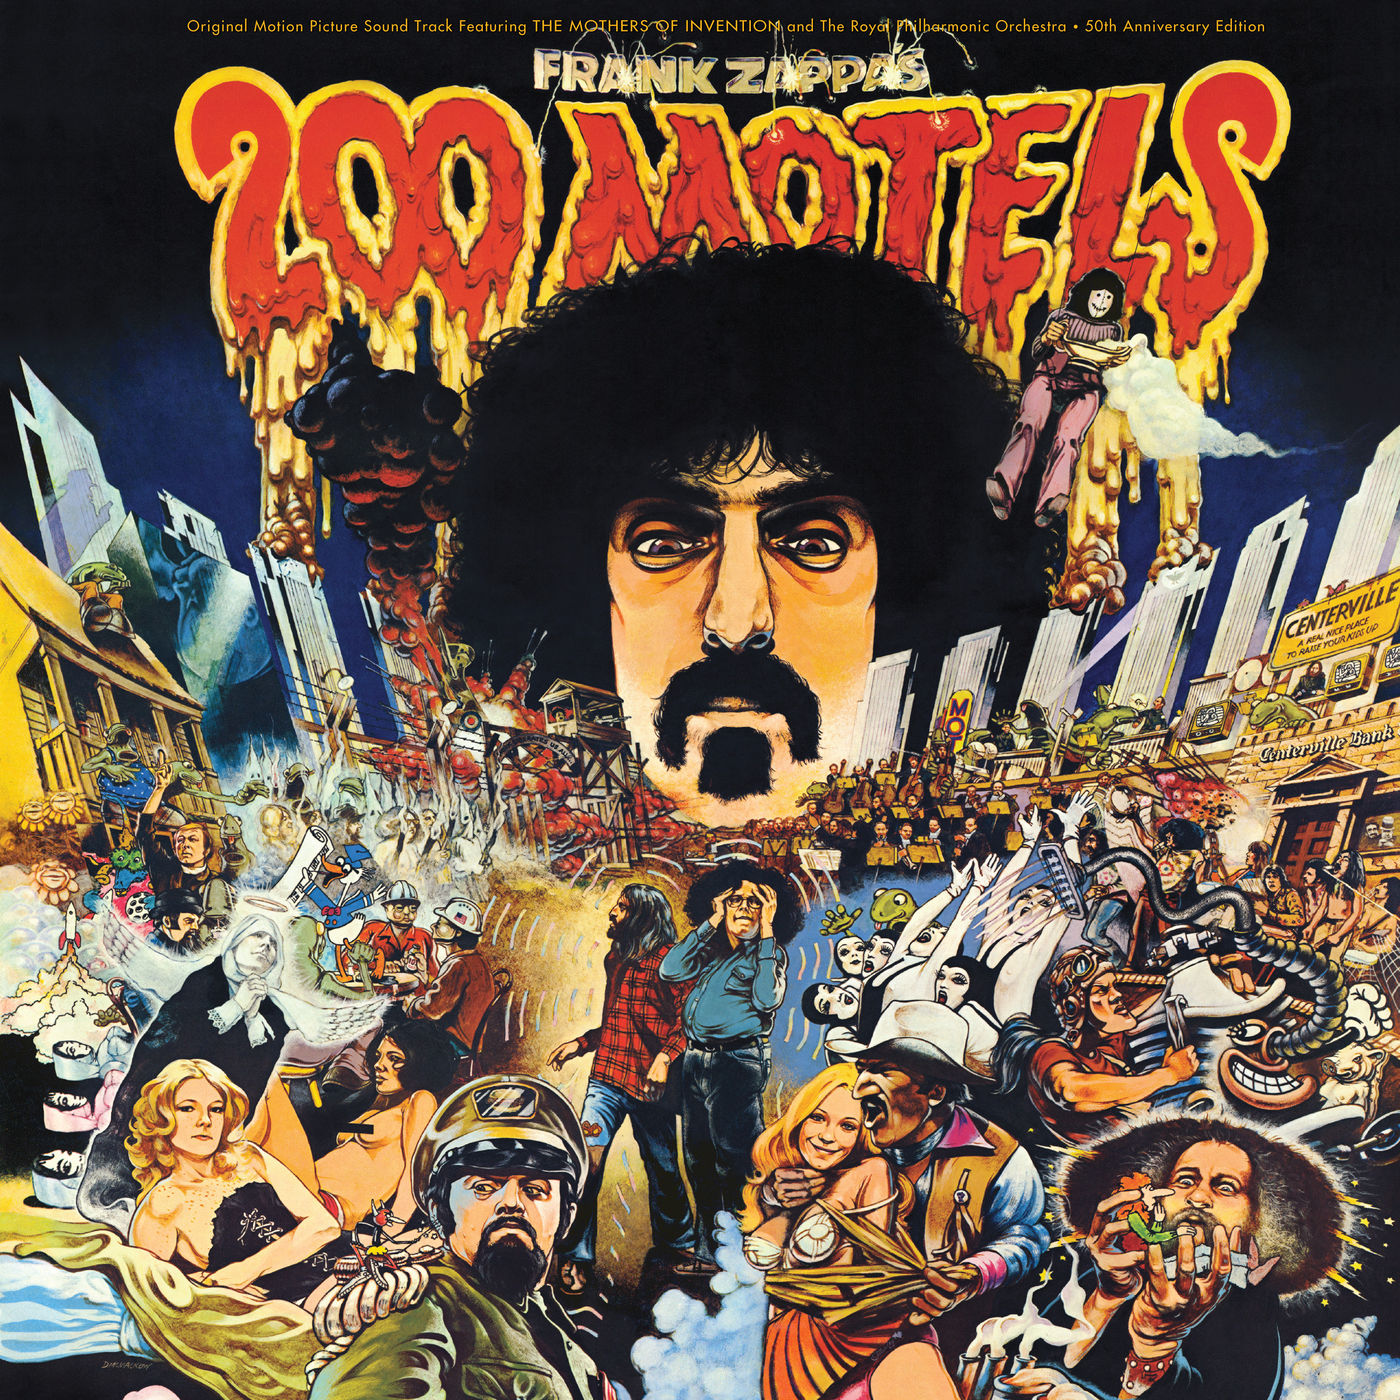 Frank Zappa - The Mothers Of Invention - 1971 - 200 Motels 50th Anniv Ed [2021] CD5 24-96